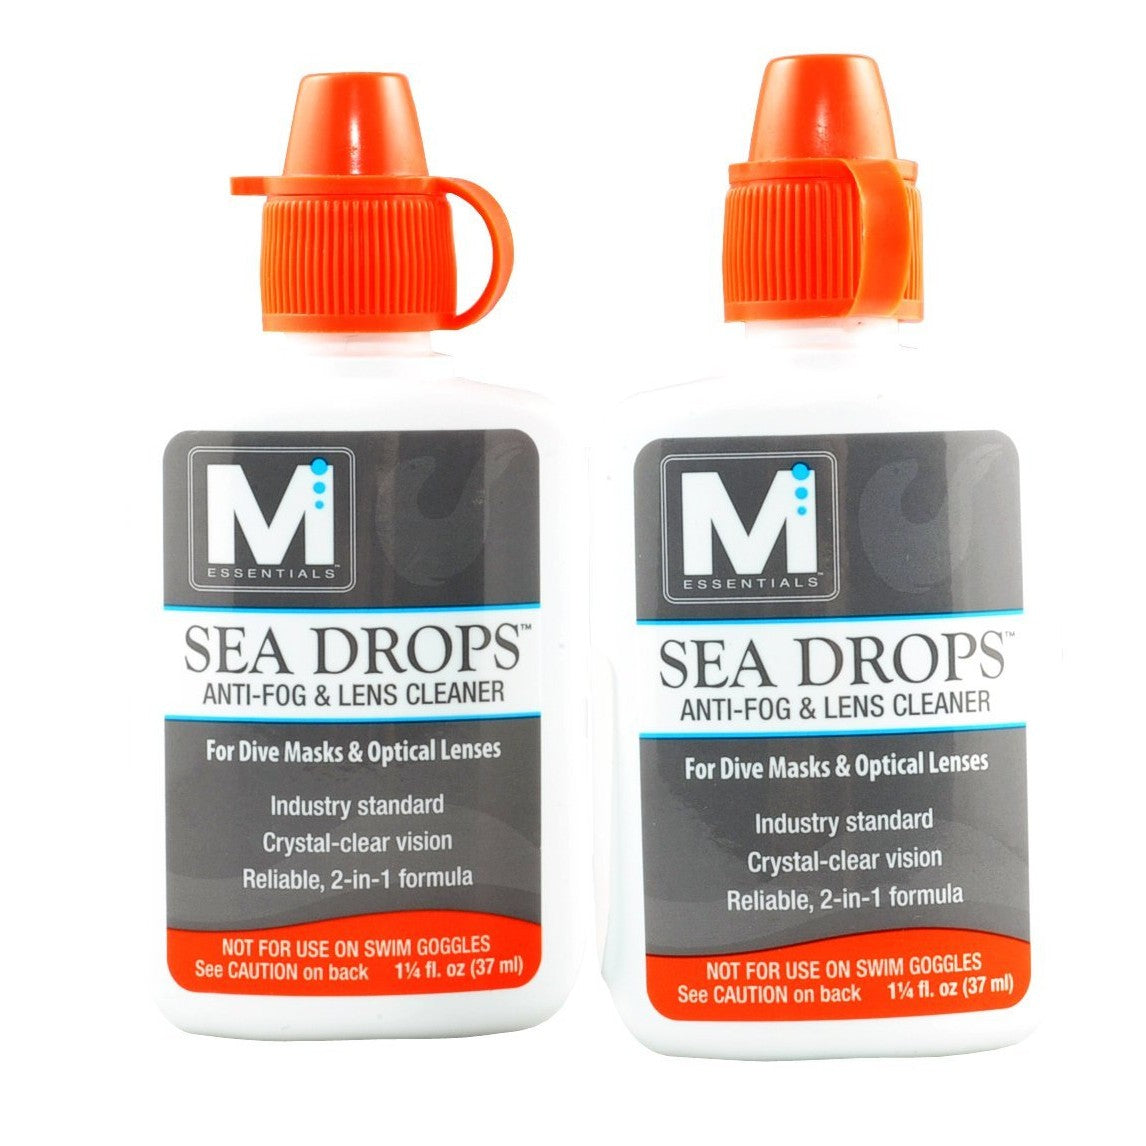 Sea Drops Anti-Fog and Lens Cleaner